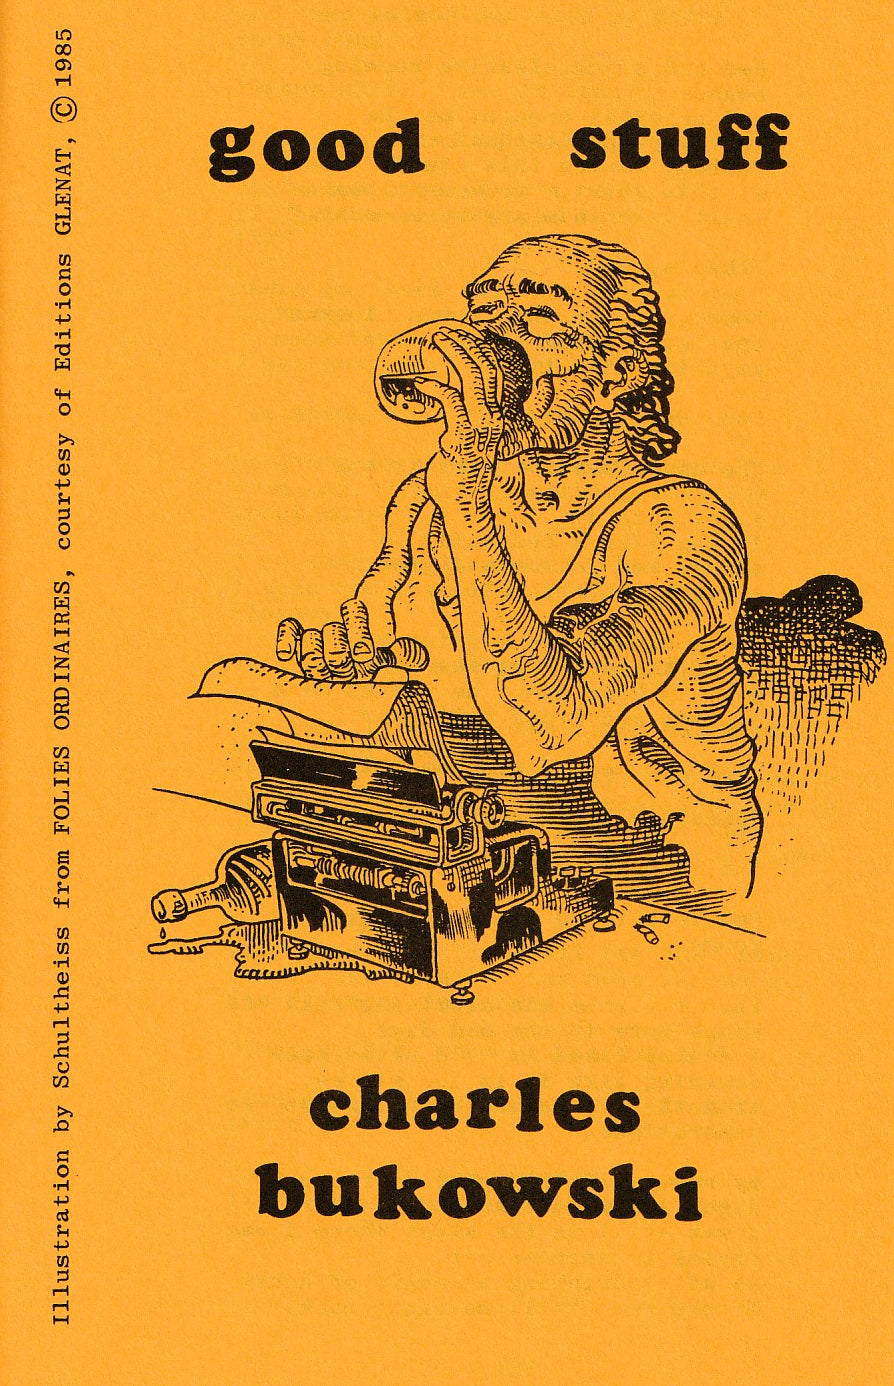 Wormwood 100 #559/700 – Good Stuff Special Charles Bukowski Section 13 Poems, Three Uncollected (1985)